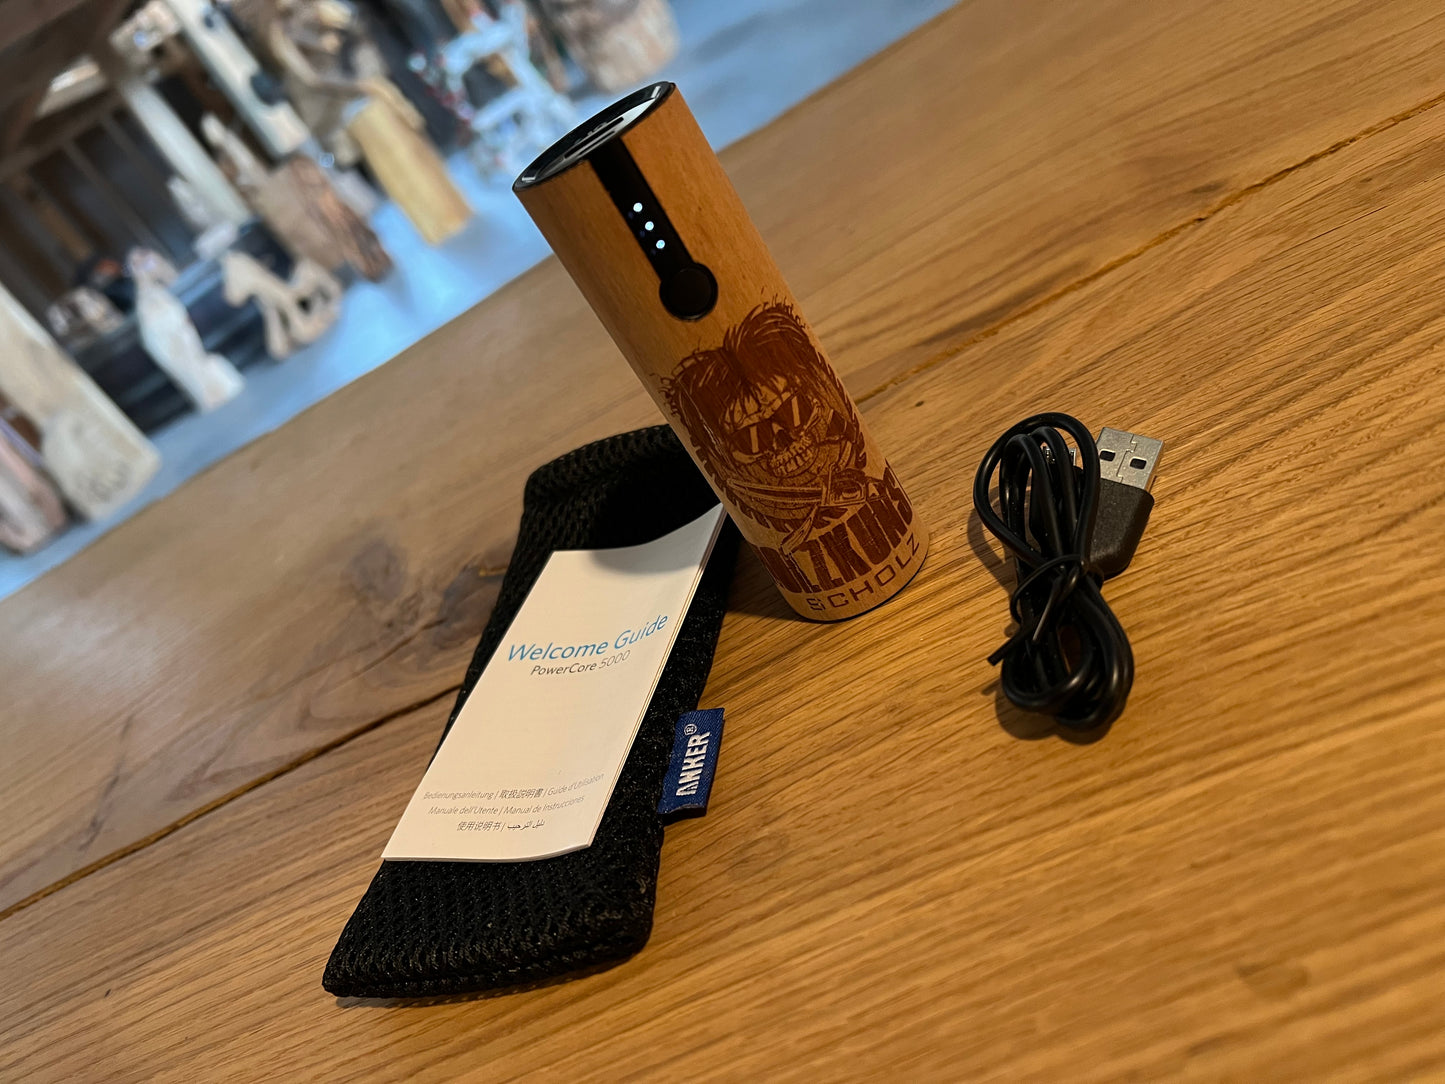 HKS Powerbank First Edition